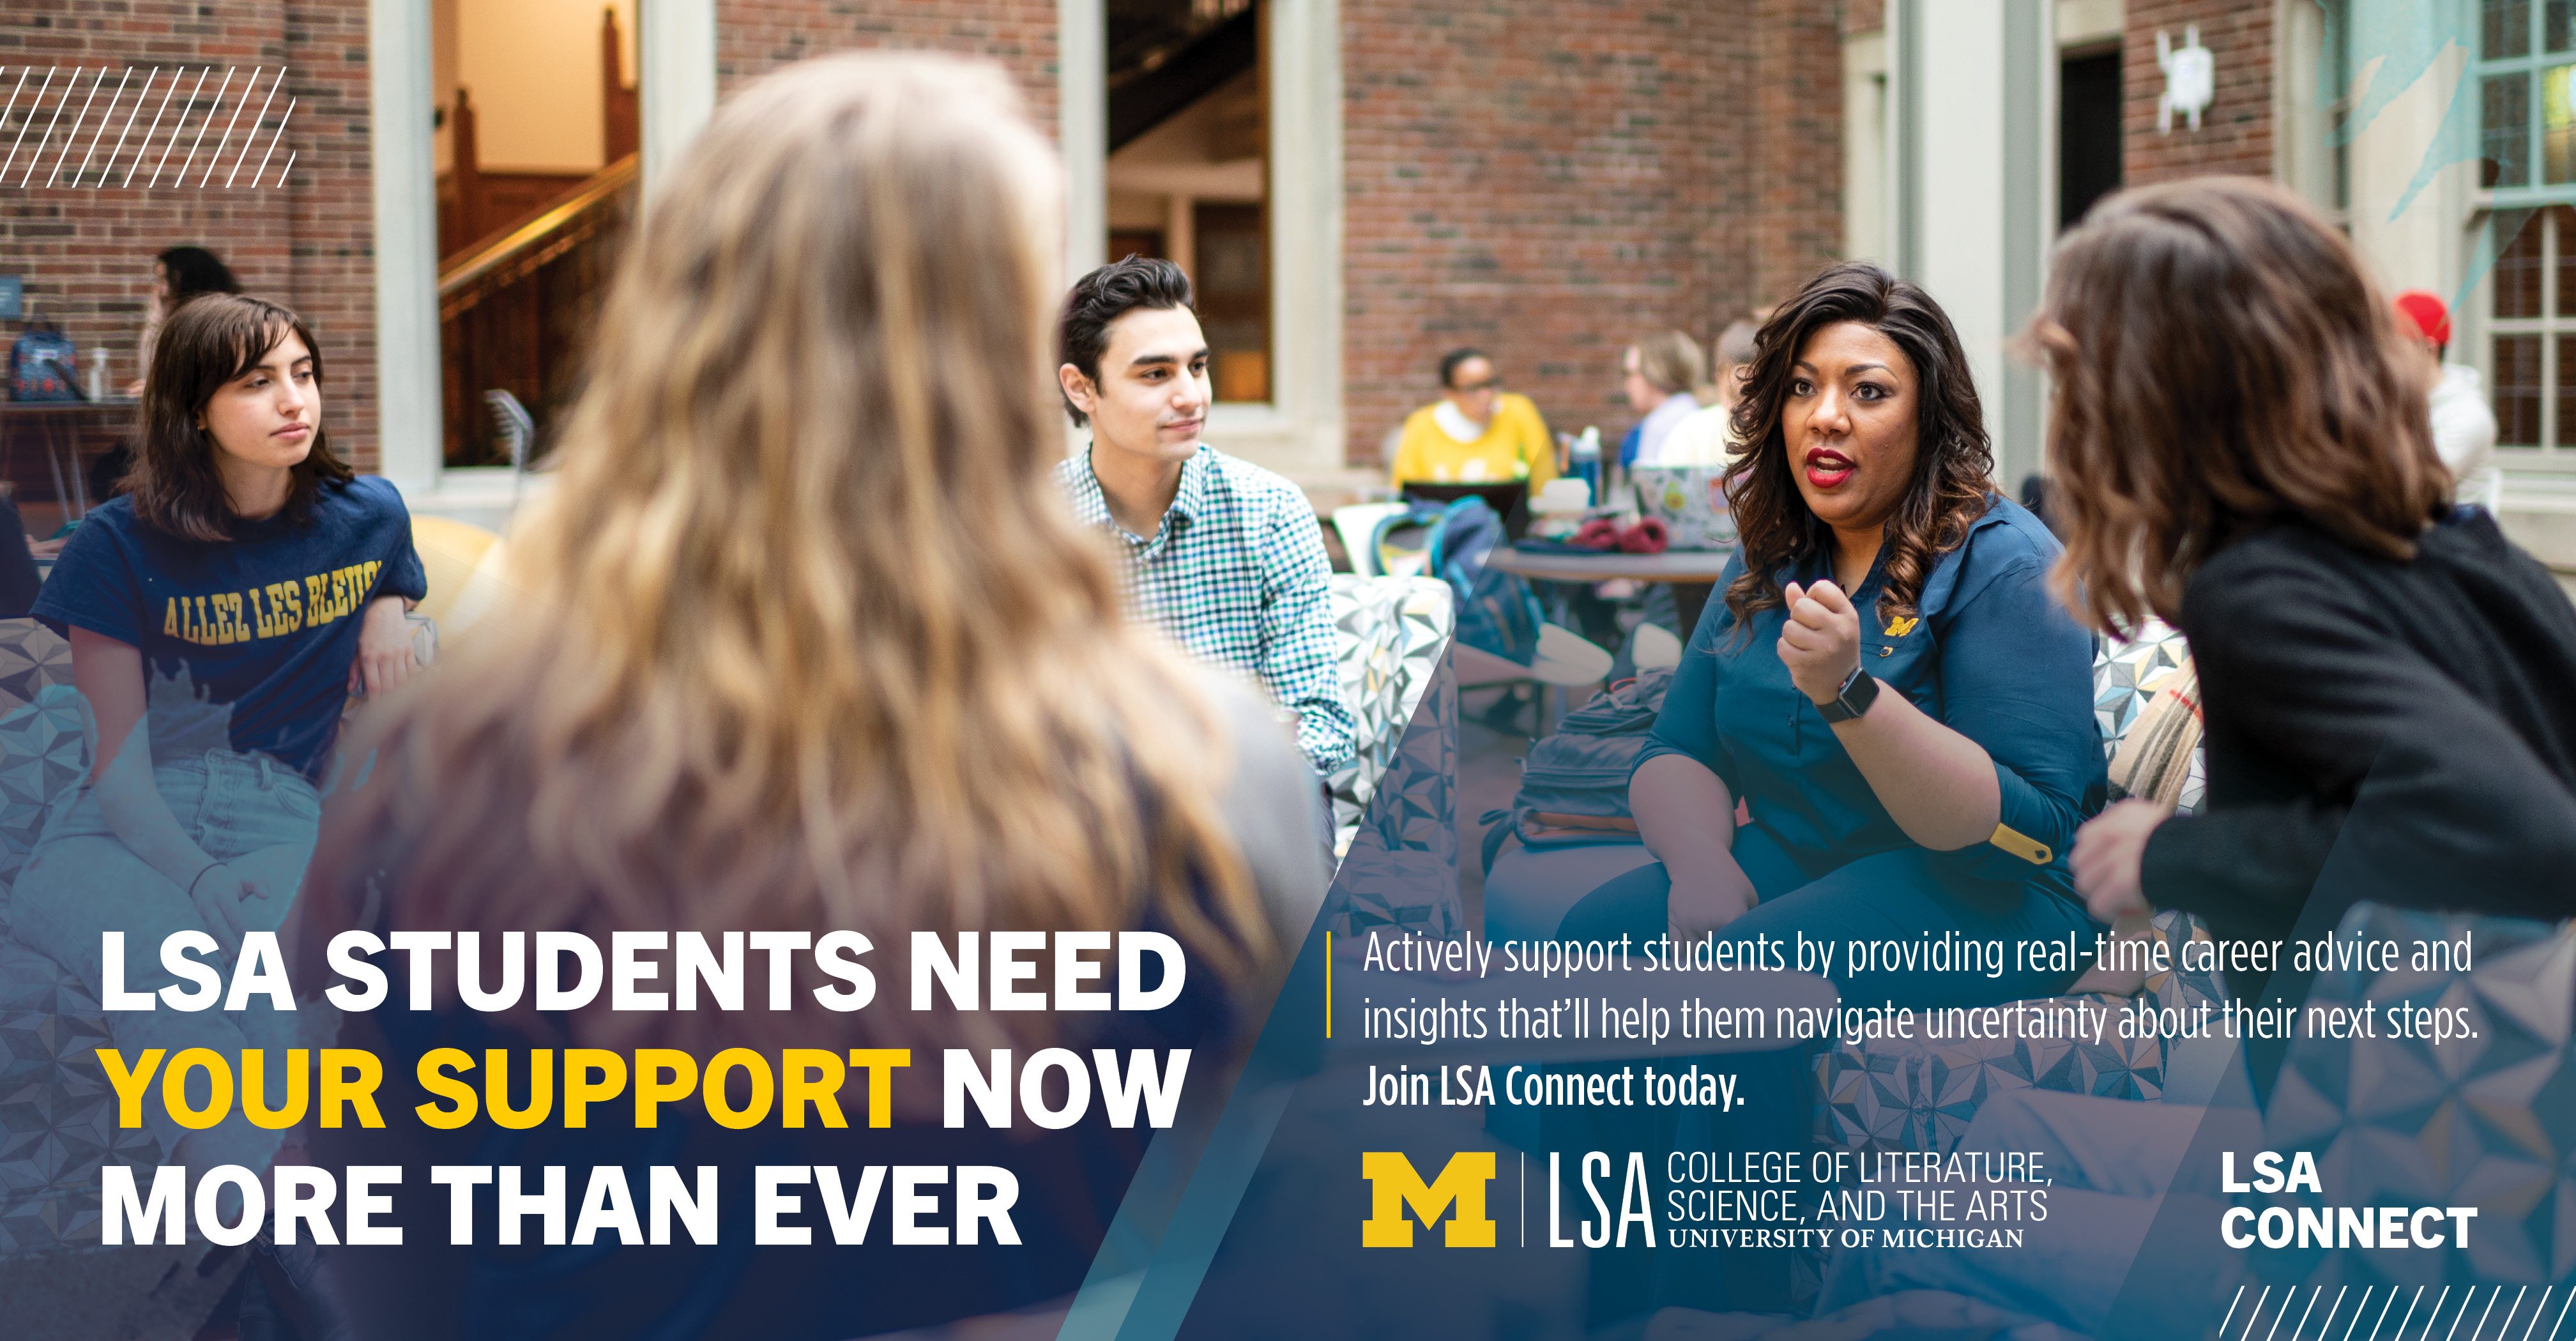 LSA Connect: "LSA students need your support now more than ever. Actively support students by providing real-time career advice and insights that'll help them navigate uncertainty about their next steps. Join LSA Connect today."